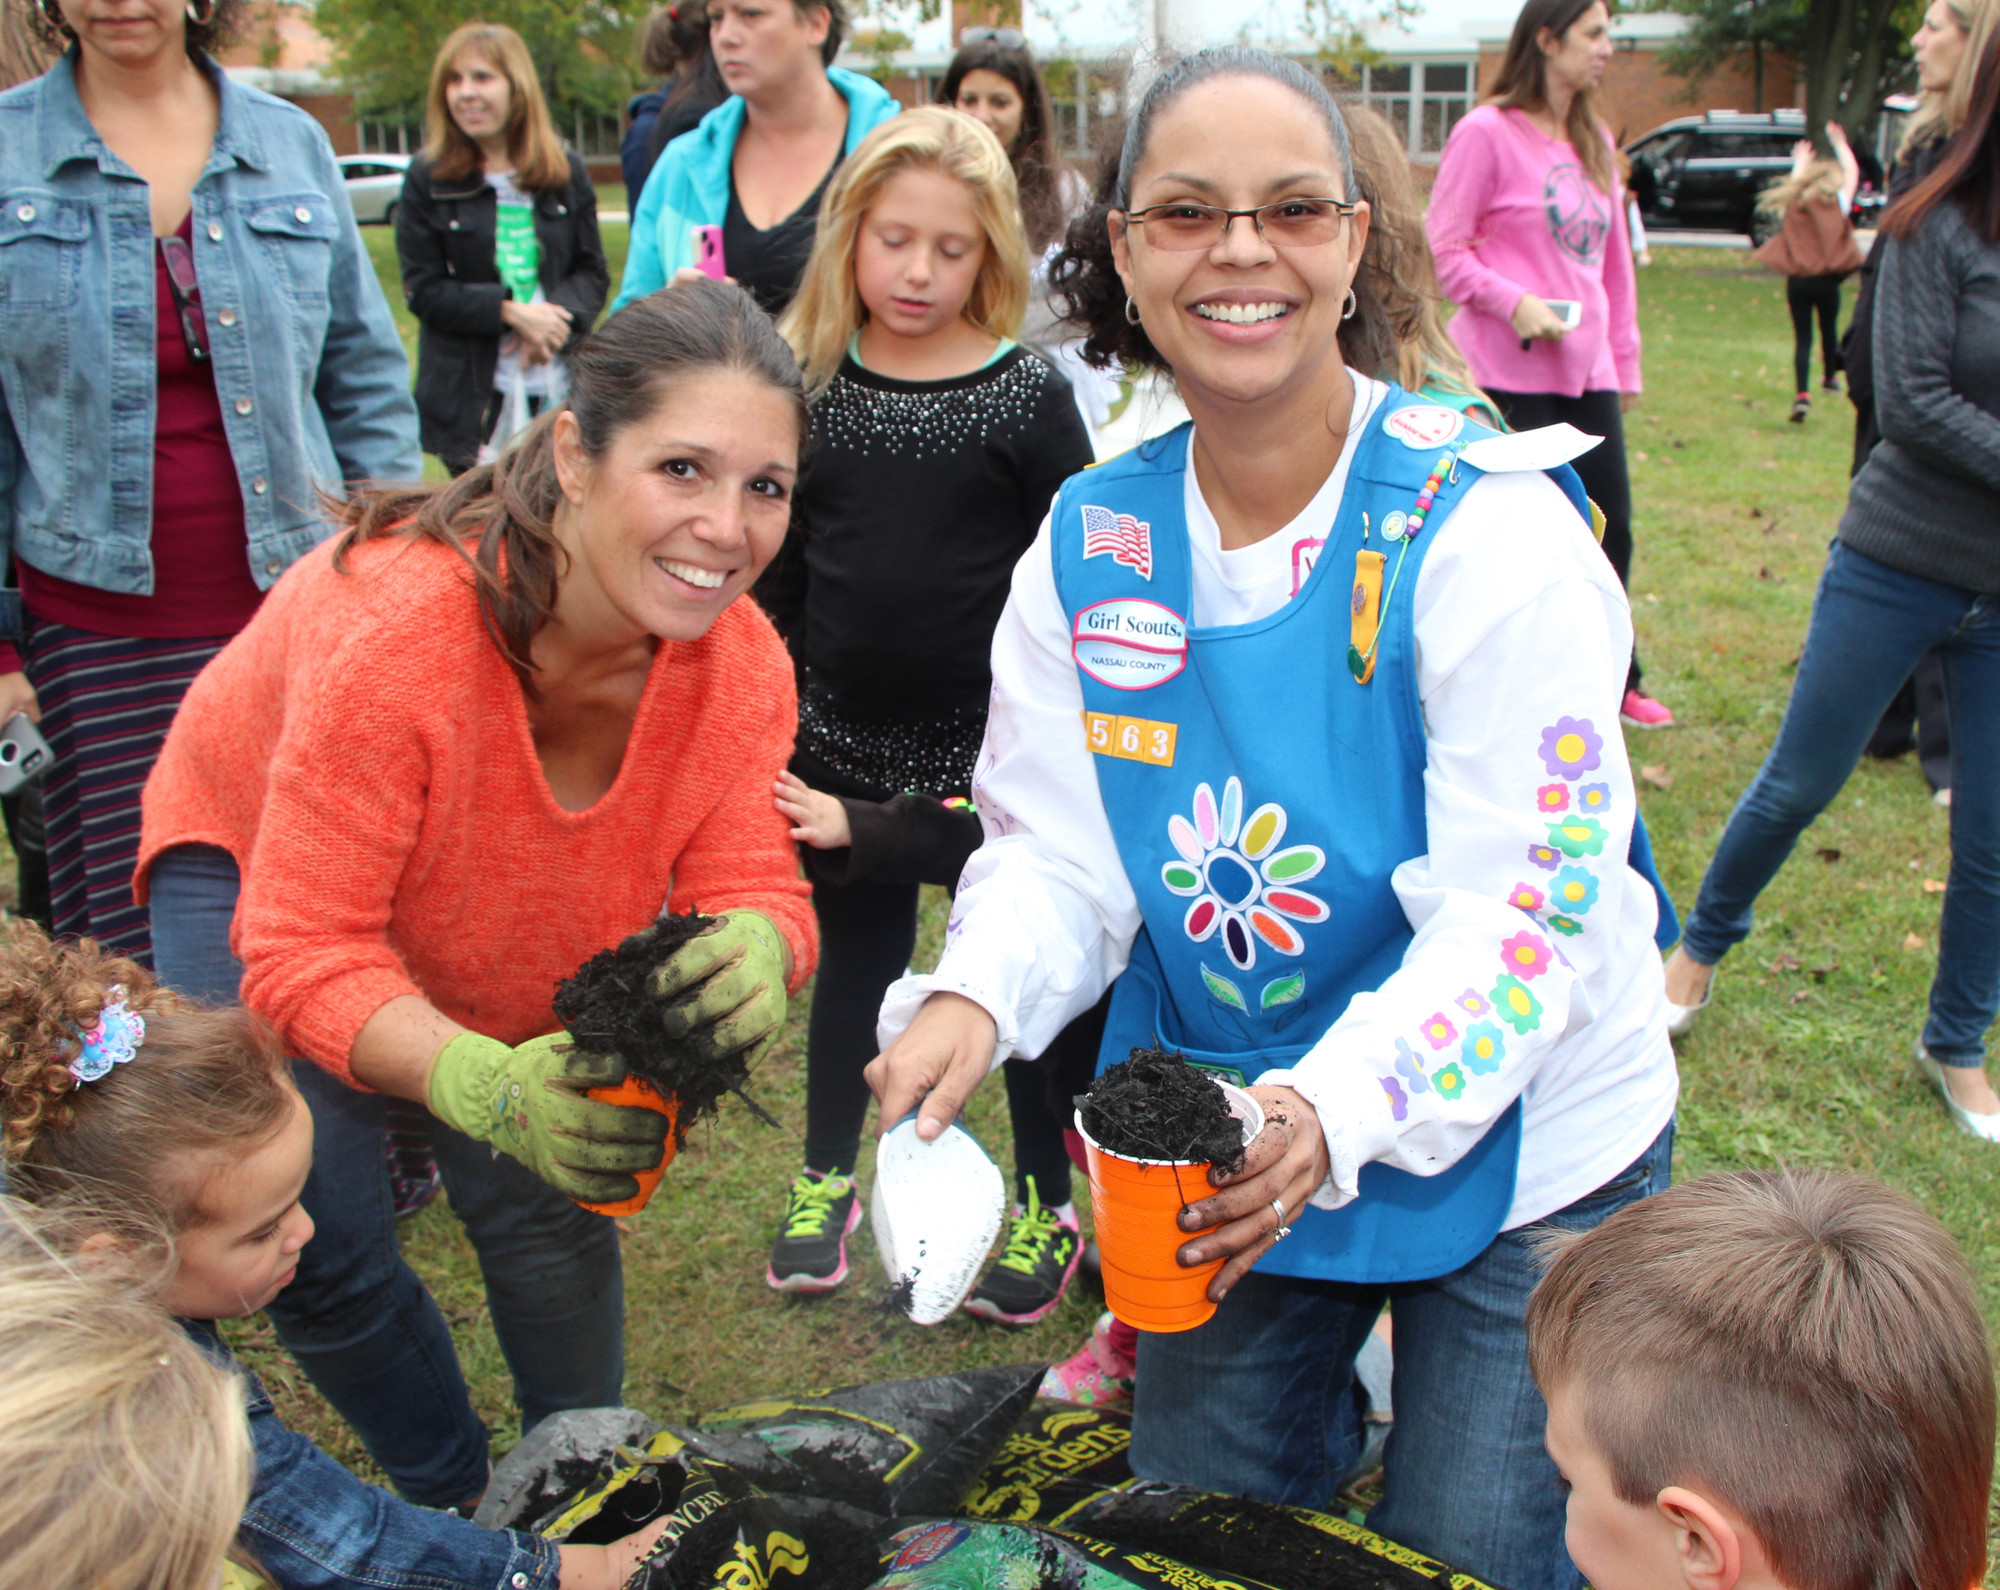 Kim Frank, left, and Vanessa Carlson, members of the Bowling Green Parent Teacher Association, helped organize the anti-bullying and beautification event at Bowling Green.